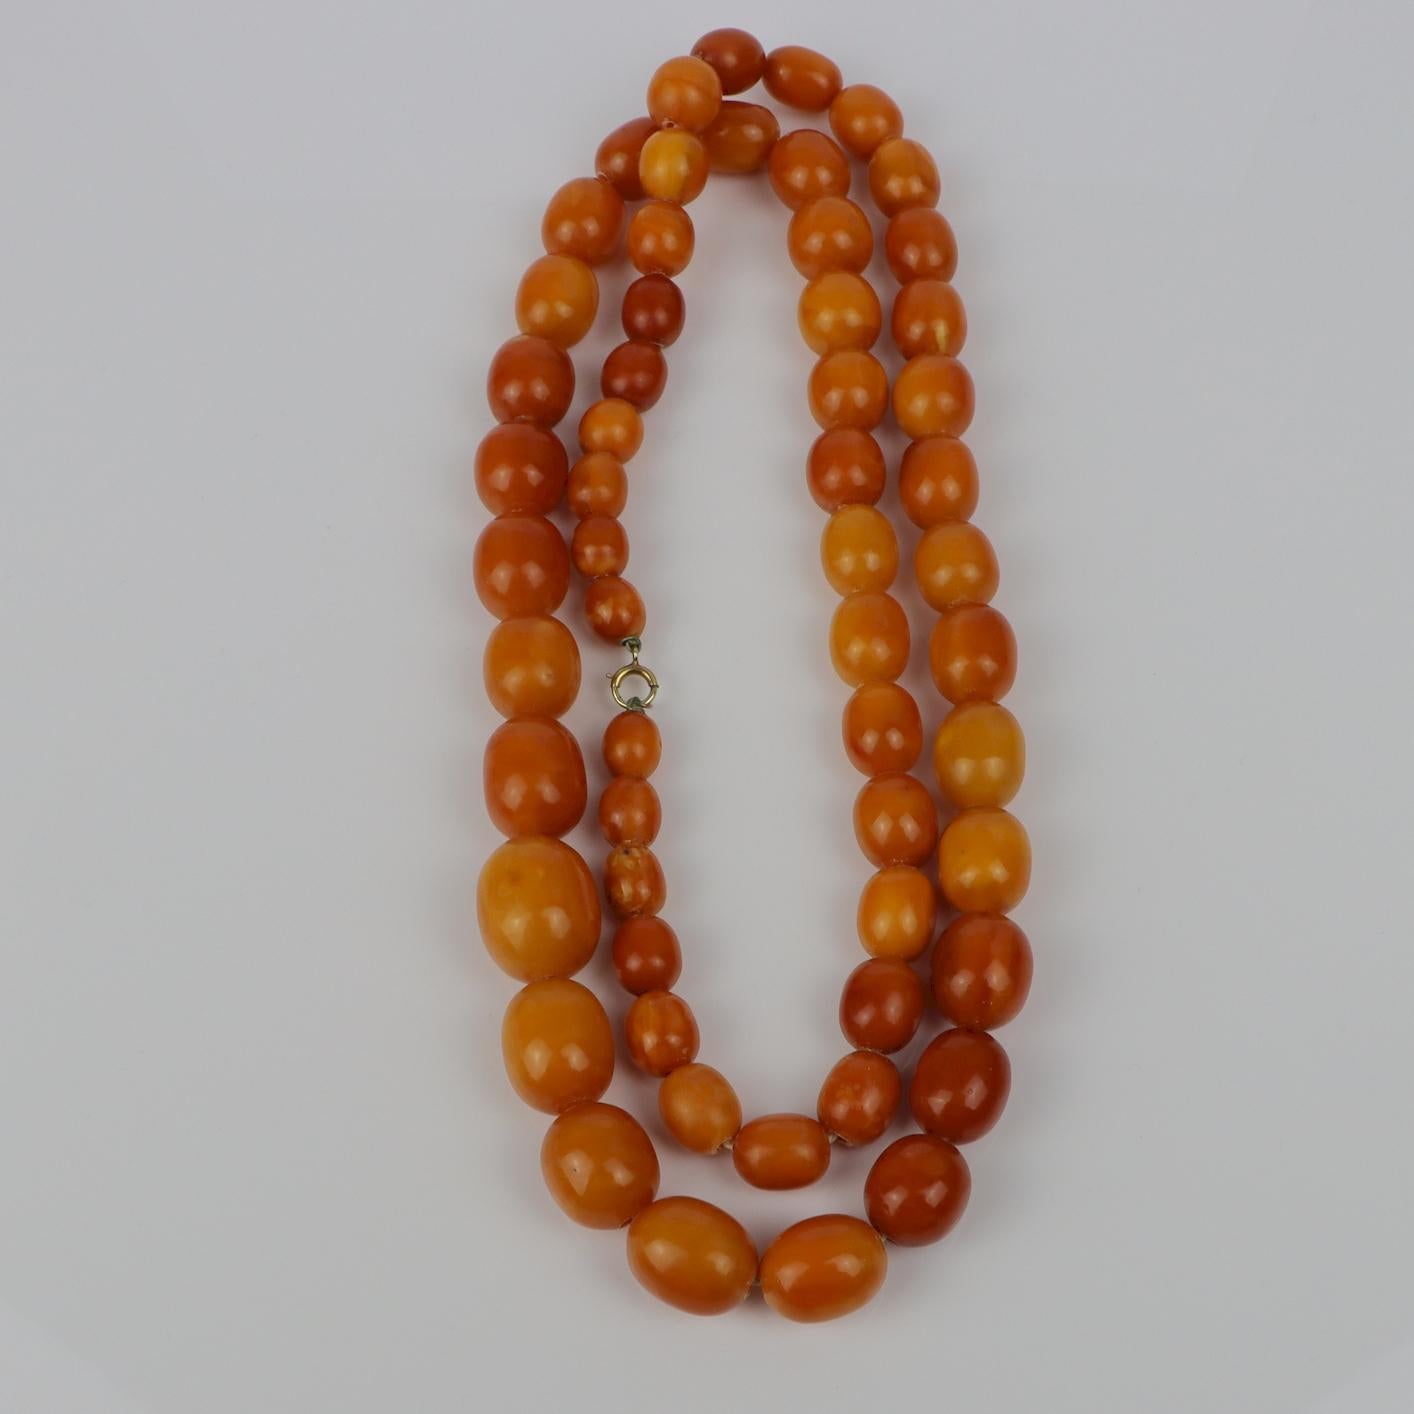 Antique 14K Gold Beeswax Amber Bead Necklace For Sale 12